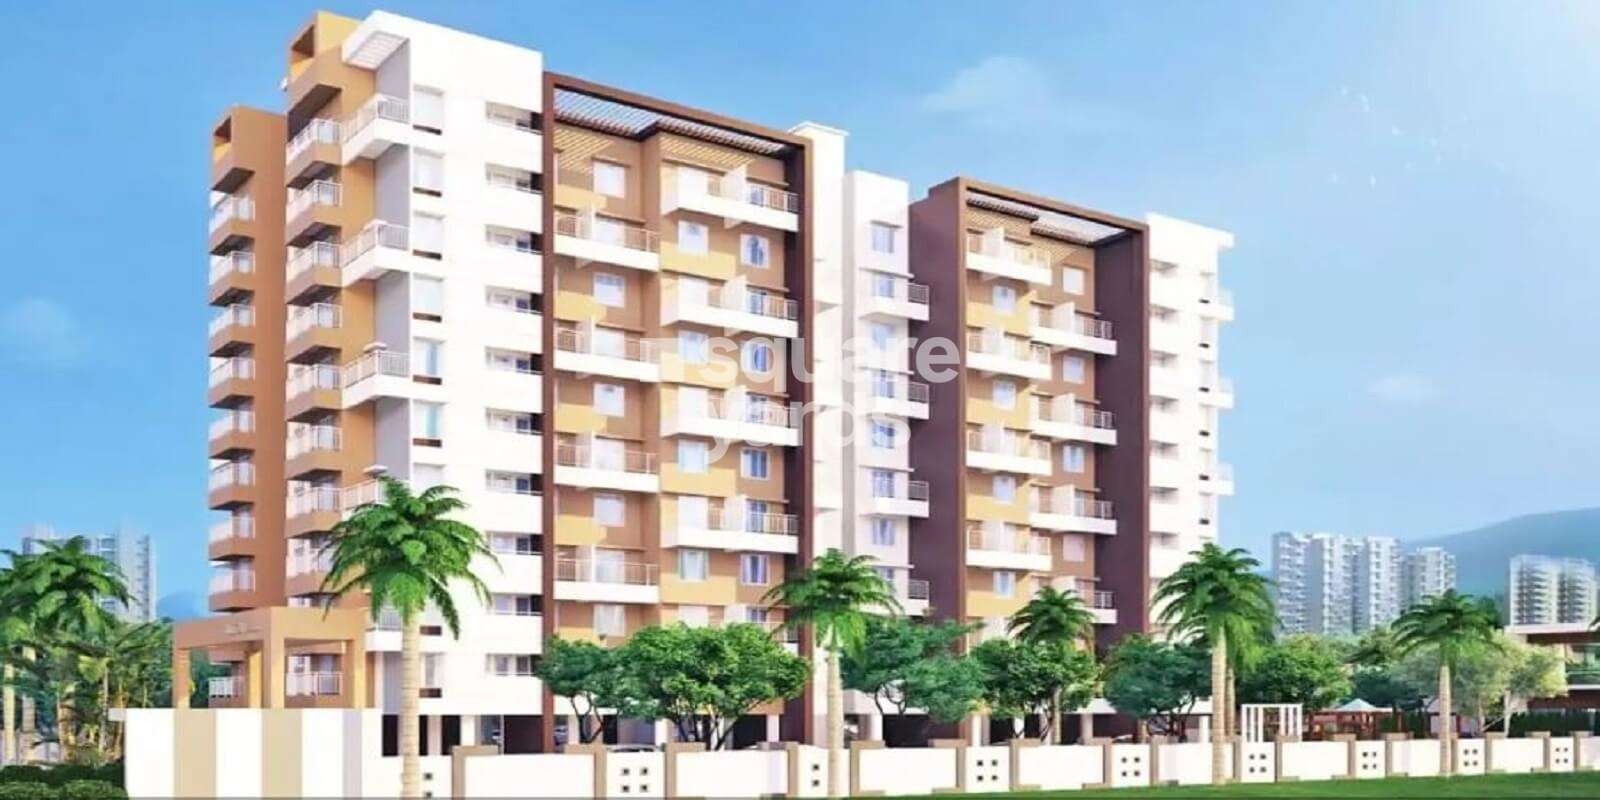 Reviews　Heights　Diva,　in　Map　Thane　Divine　Lac　Floor　Plans,　Location　Patil　22.98